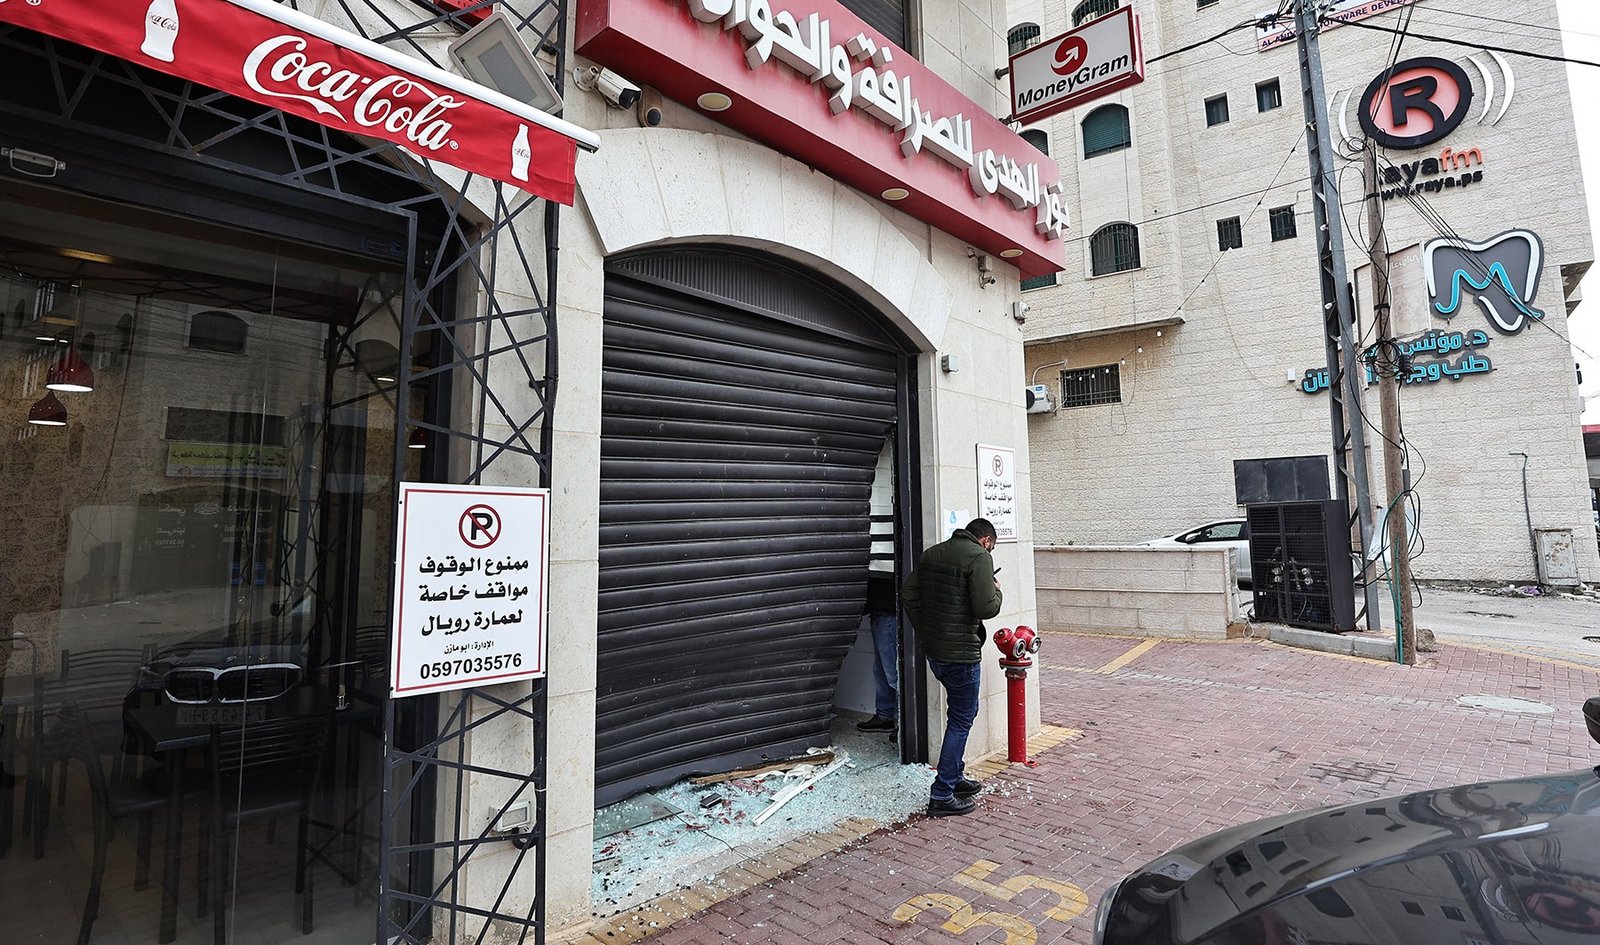 Israeli forces confiscate cash during raids in occupied West Bank | Israel Palestine conflict